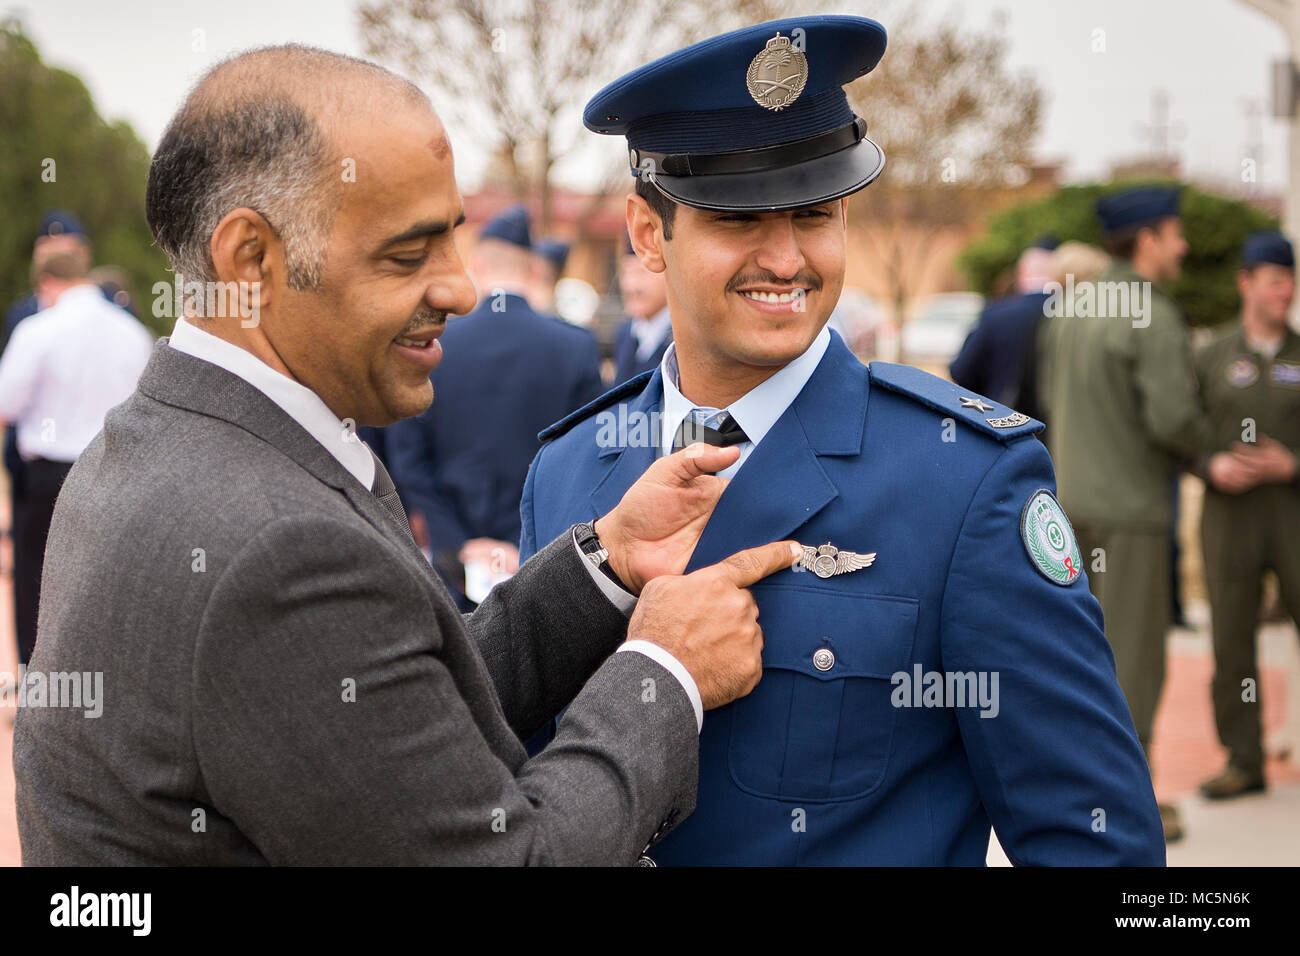 2nd Lt. Bader Alzakari, a pilot assigned to the 71st Student Squadron, has his wings pinned on by his father after the graduation ceremony April 6, 2018, at Vance Air Force Base, Oklahoma. Through a partnership with our allied country, pilots from around the world come to Vance to train. (U.S. Air Force photo by Airman 1st Class Taylor Crul) Stock Photo